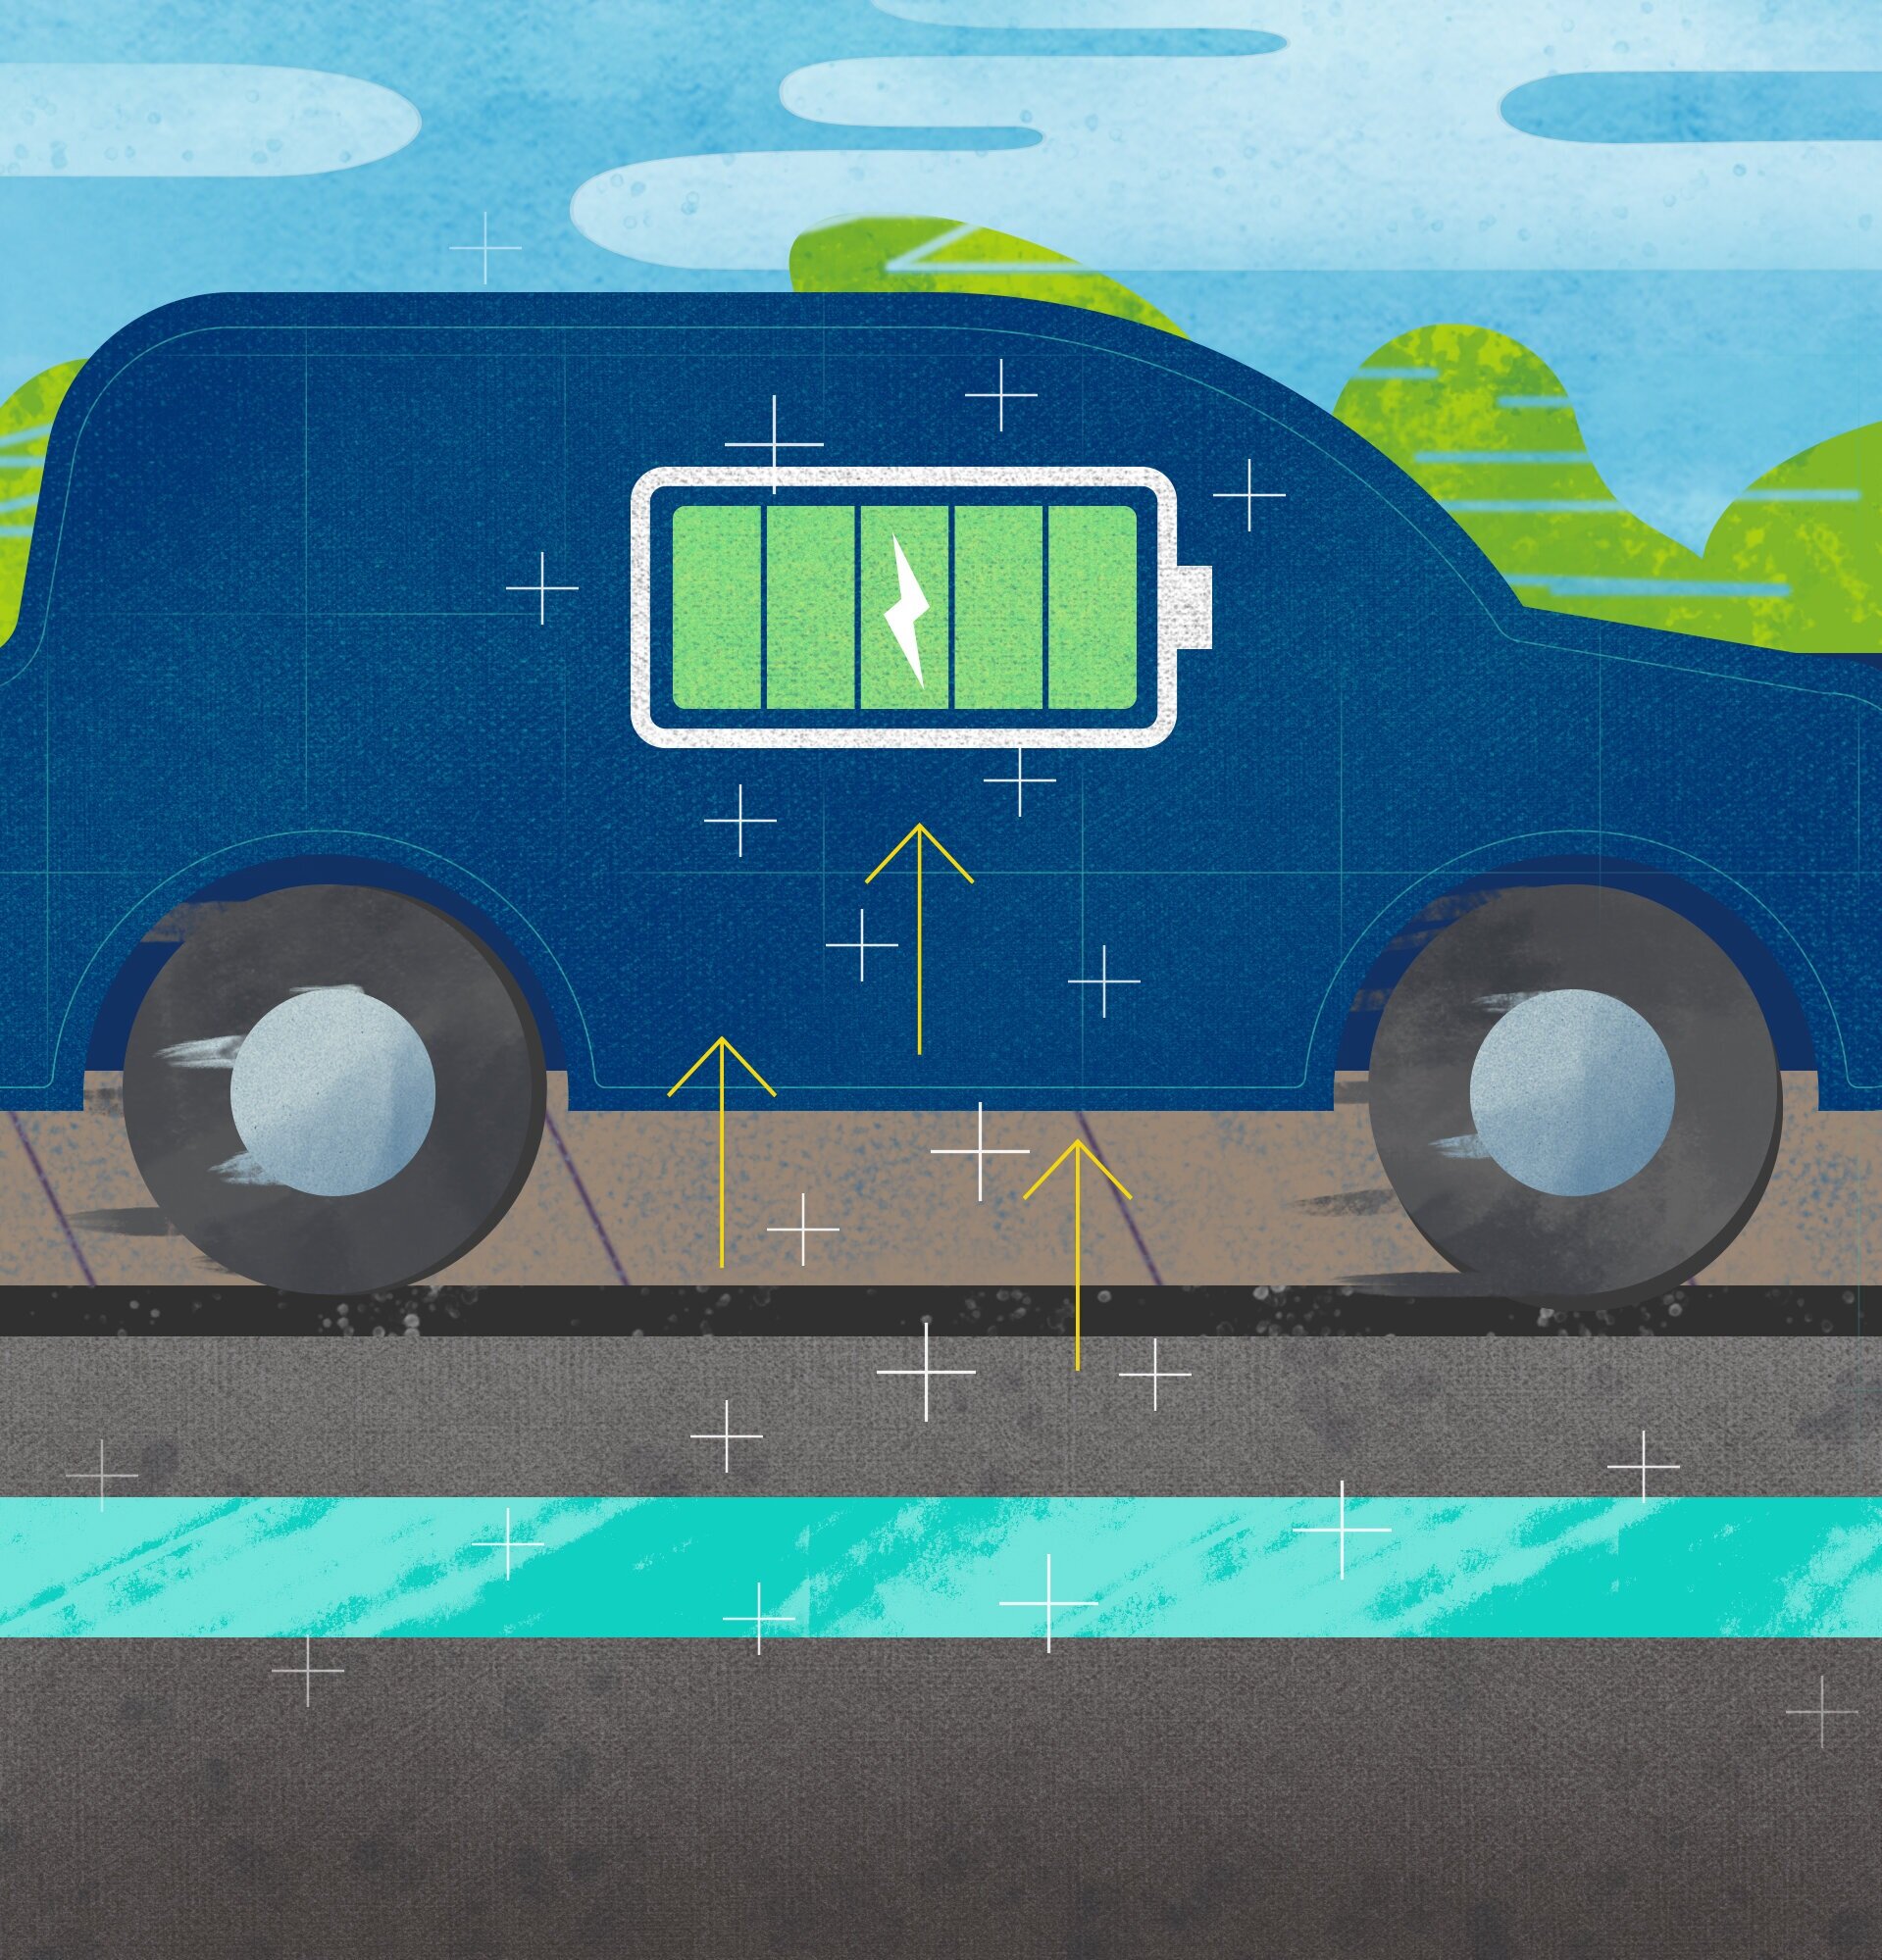  Eventually, The Ray hopes to have roads that charge electric vehicles AS you drive on them! 